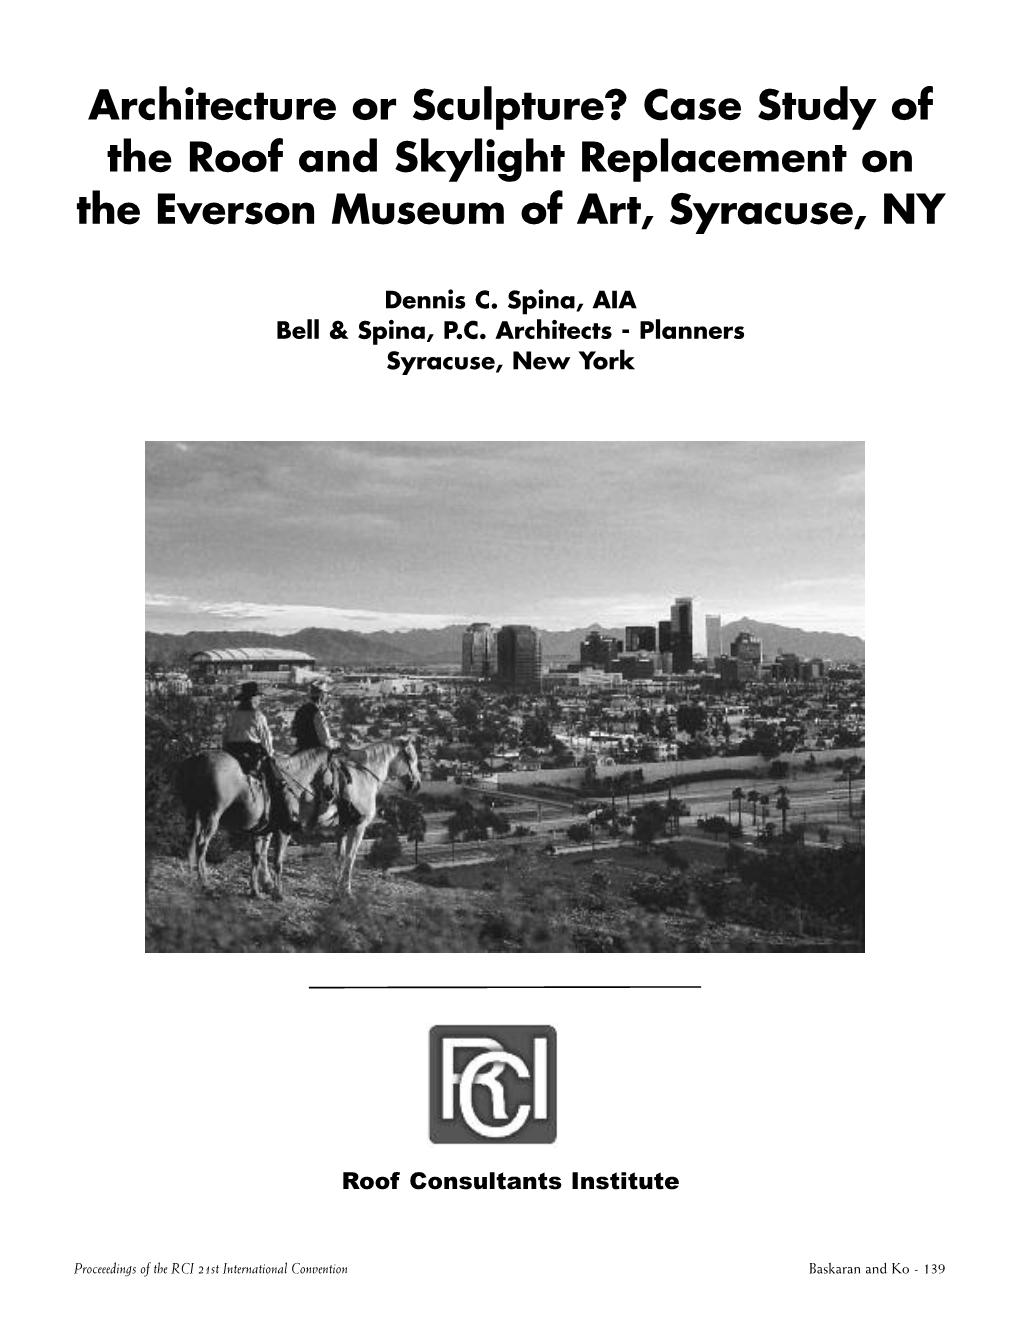 Case Study of the Roof and Skylight Replacement on the Everson Museum of Art, Syracuse, NY